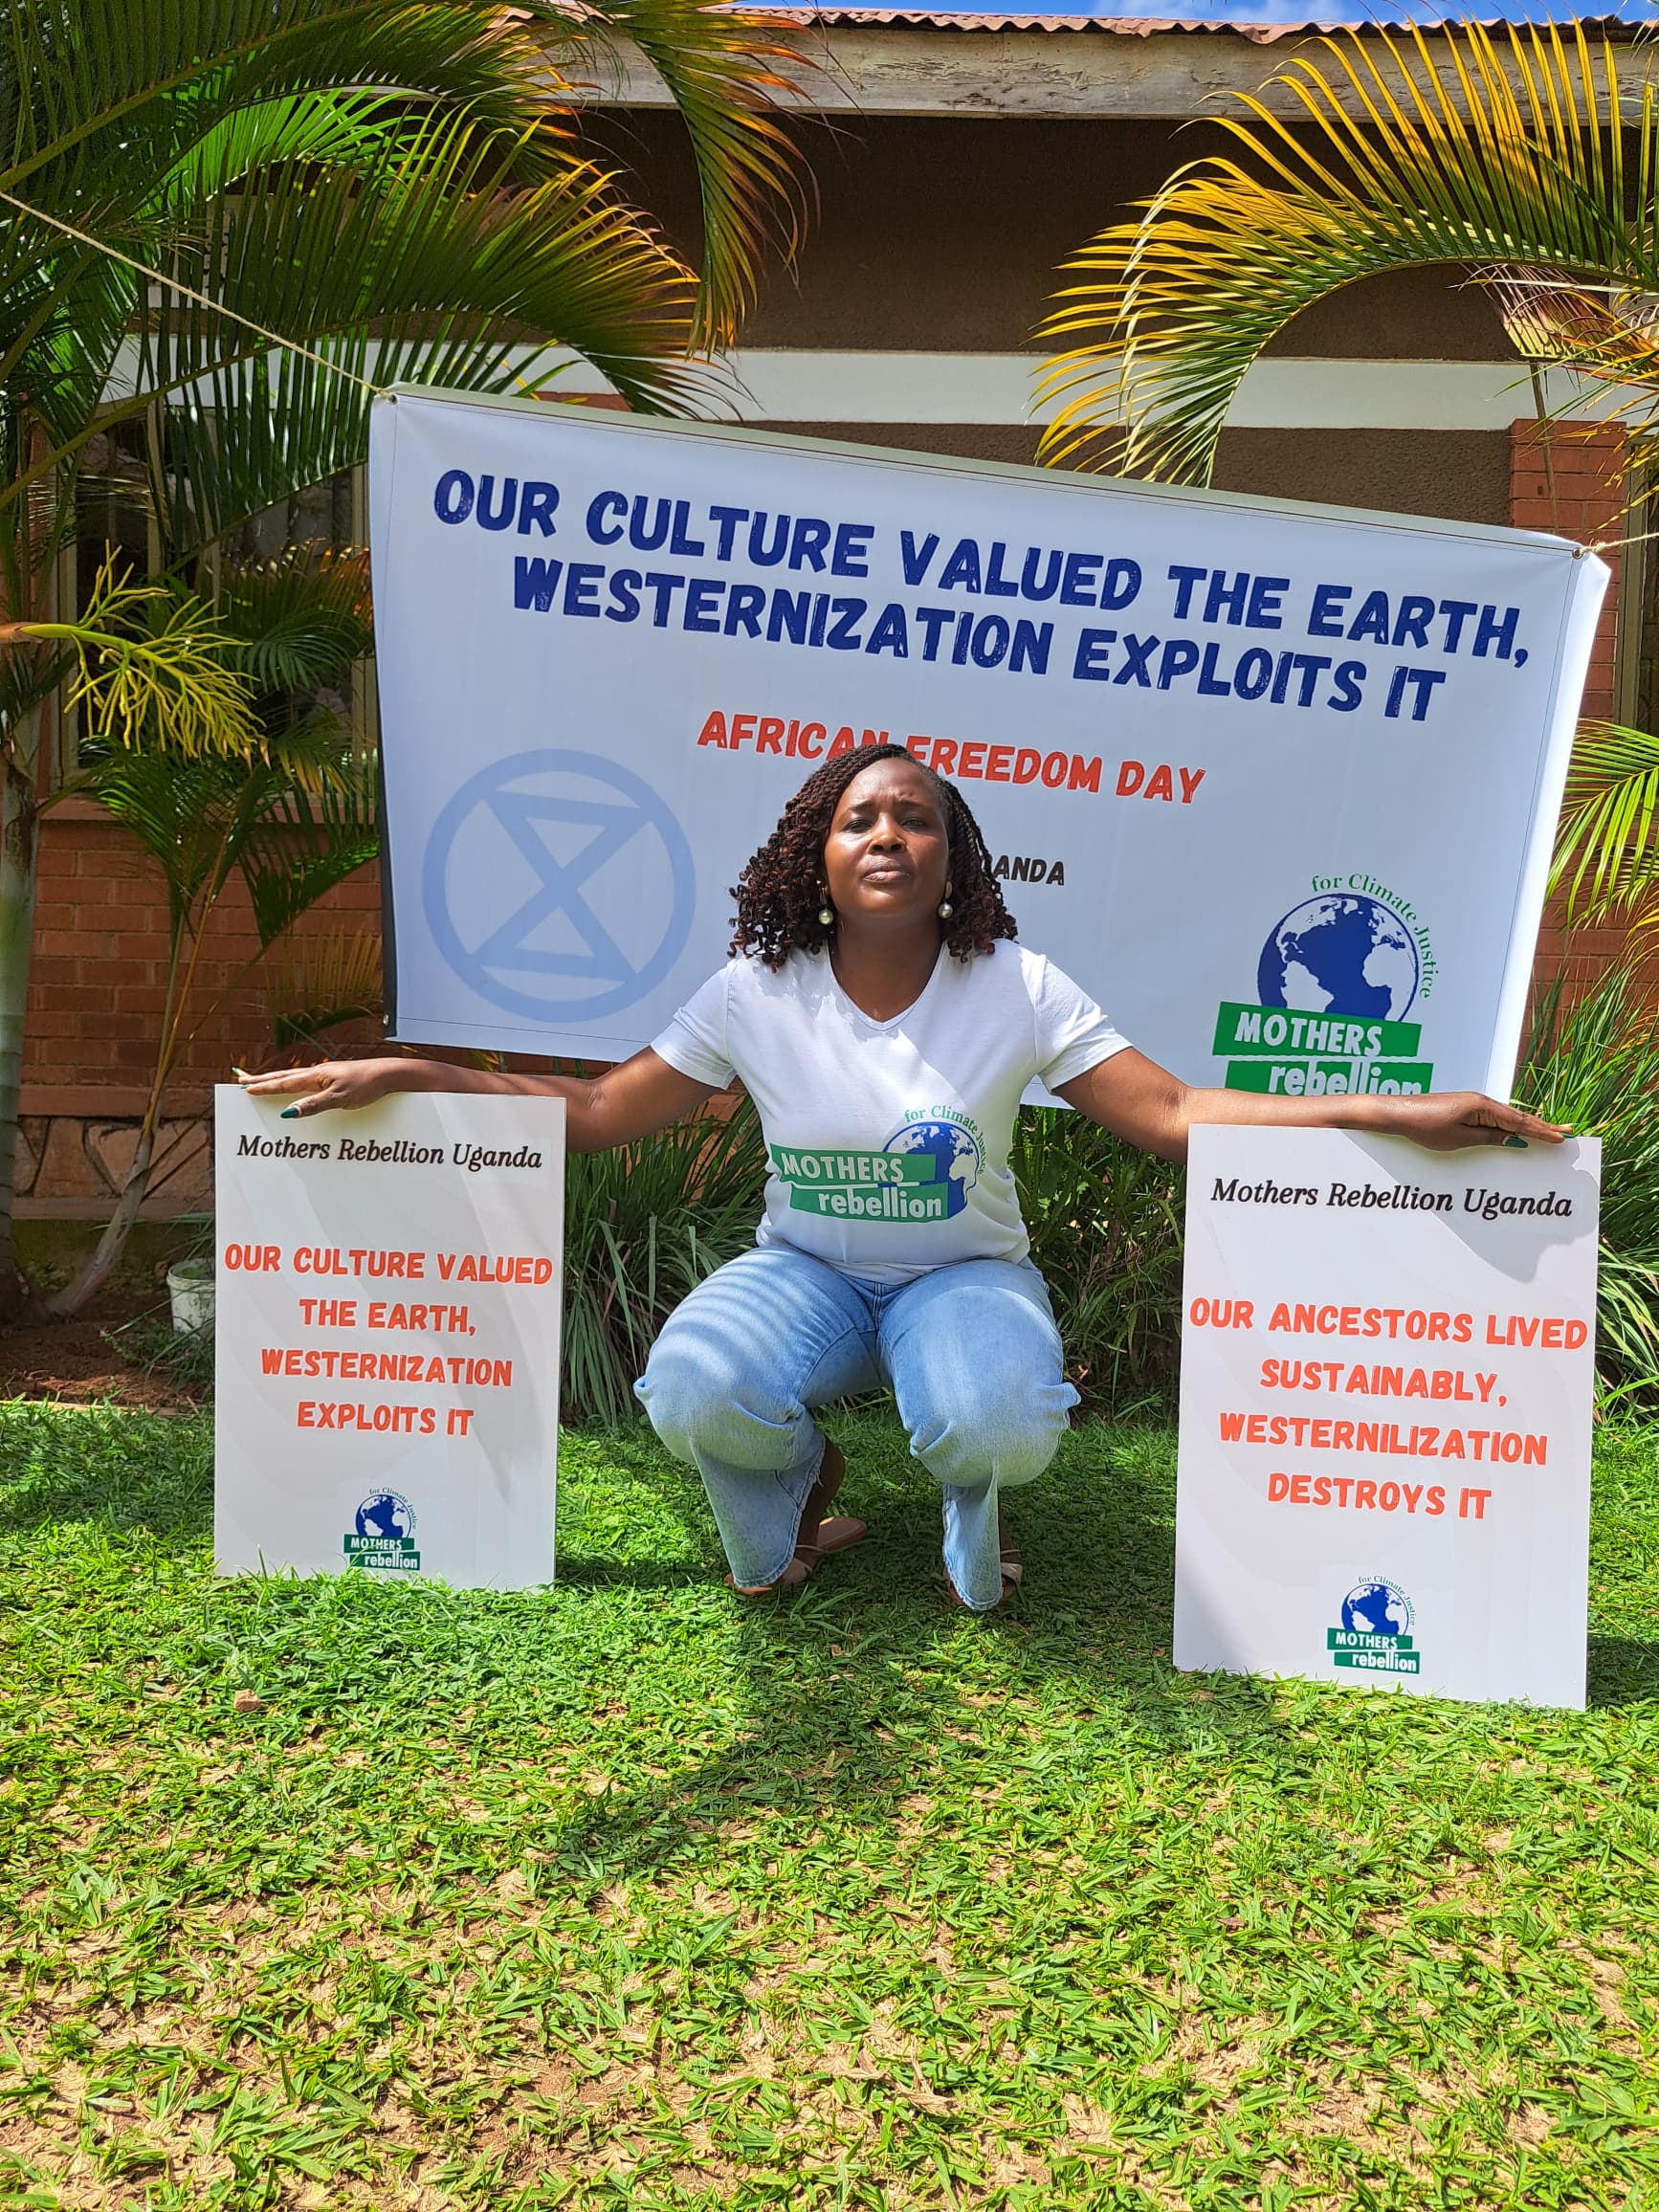 Ugandan activists rally for cultural revitalisation ahead of global circle for climate Justice